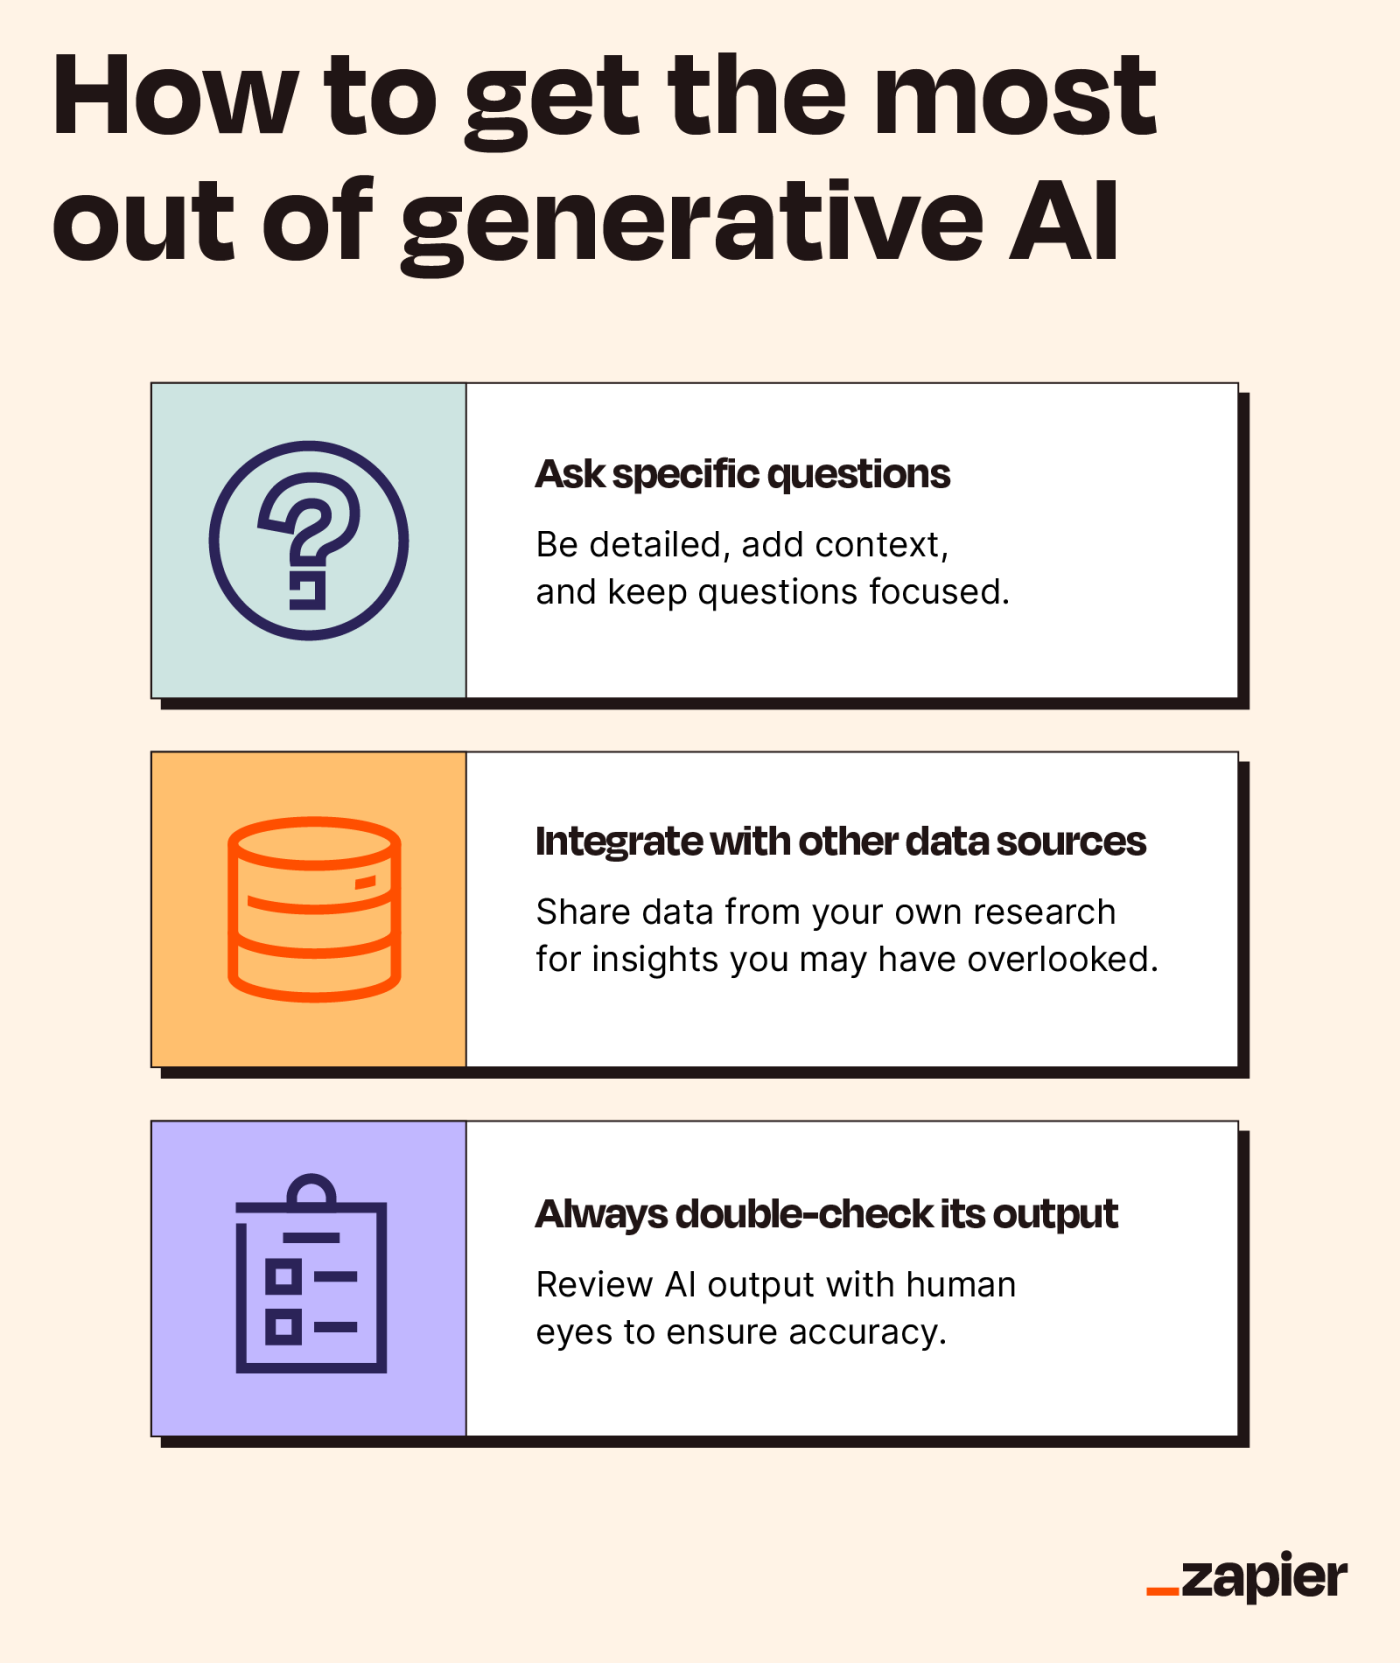 Graphic with tips on how to get the most out of generative AI, including asking questions, integrating with other data sources, and double-checking outputs.